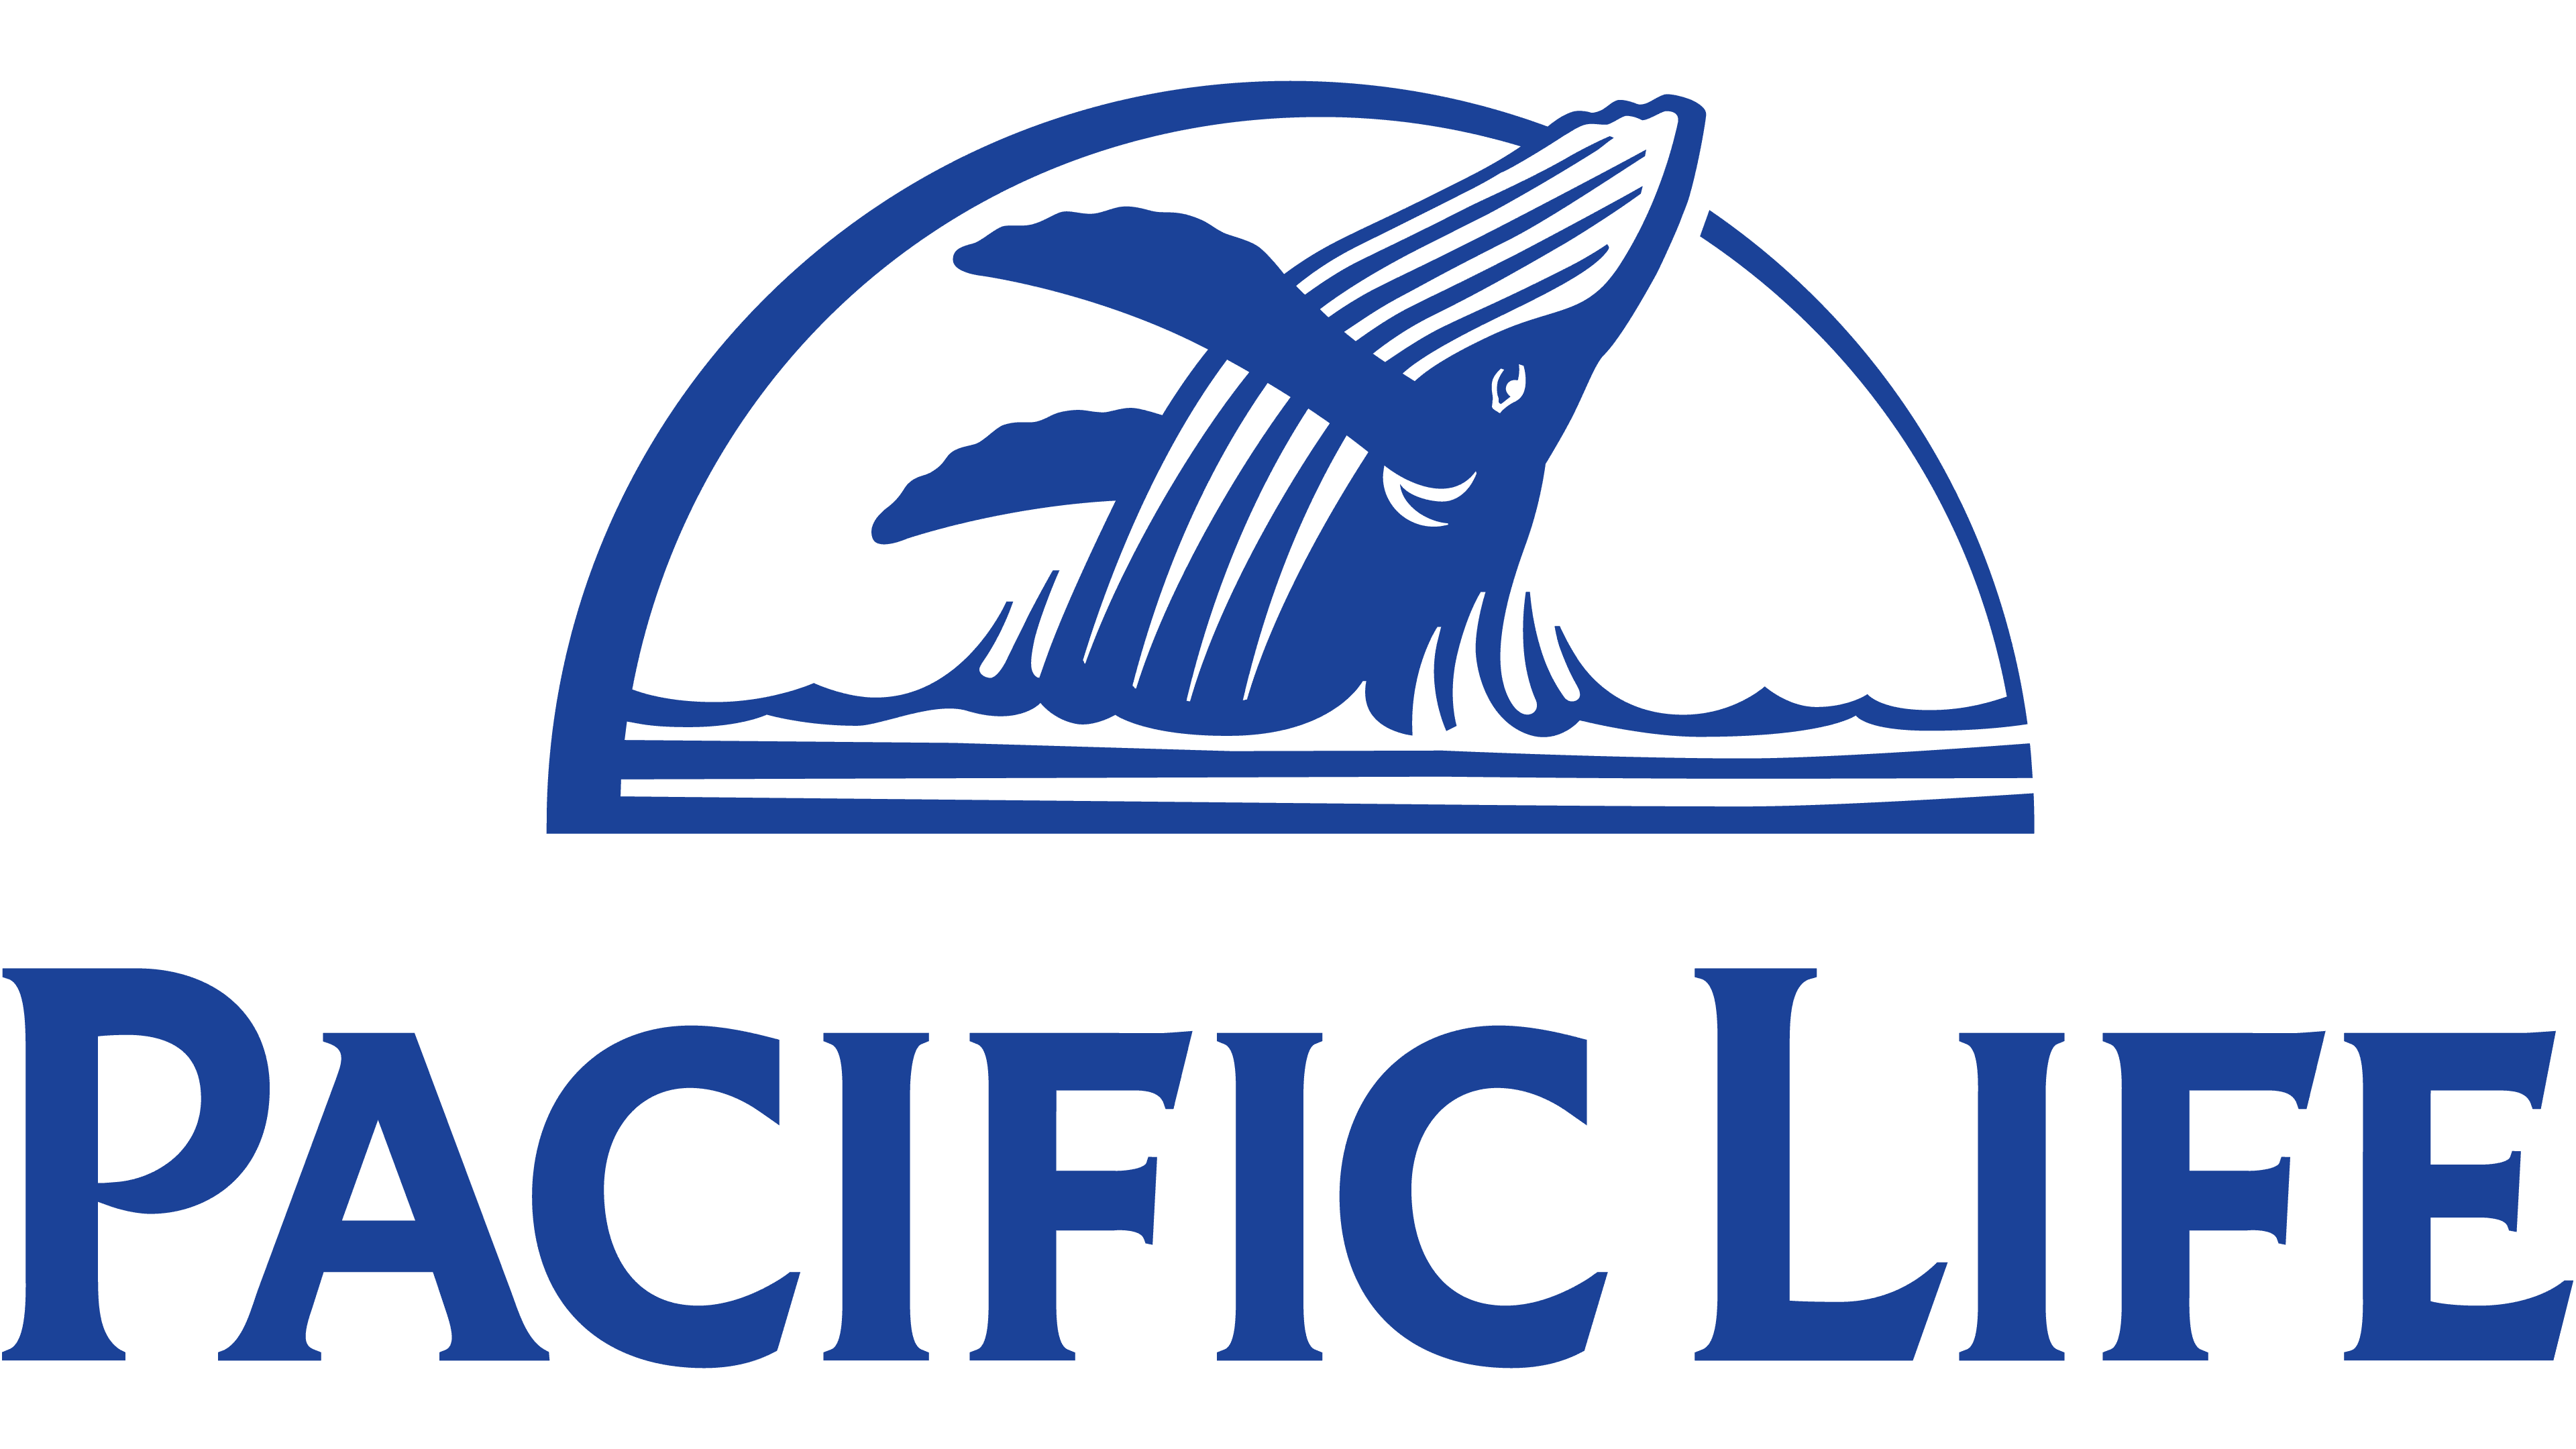 pacific life illustration download